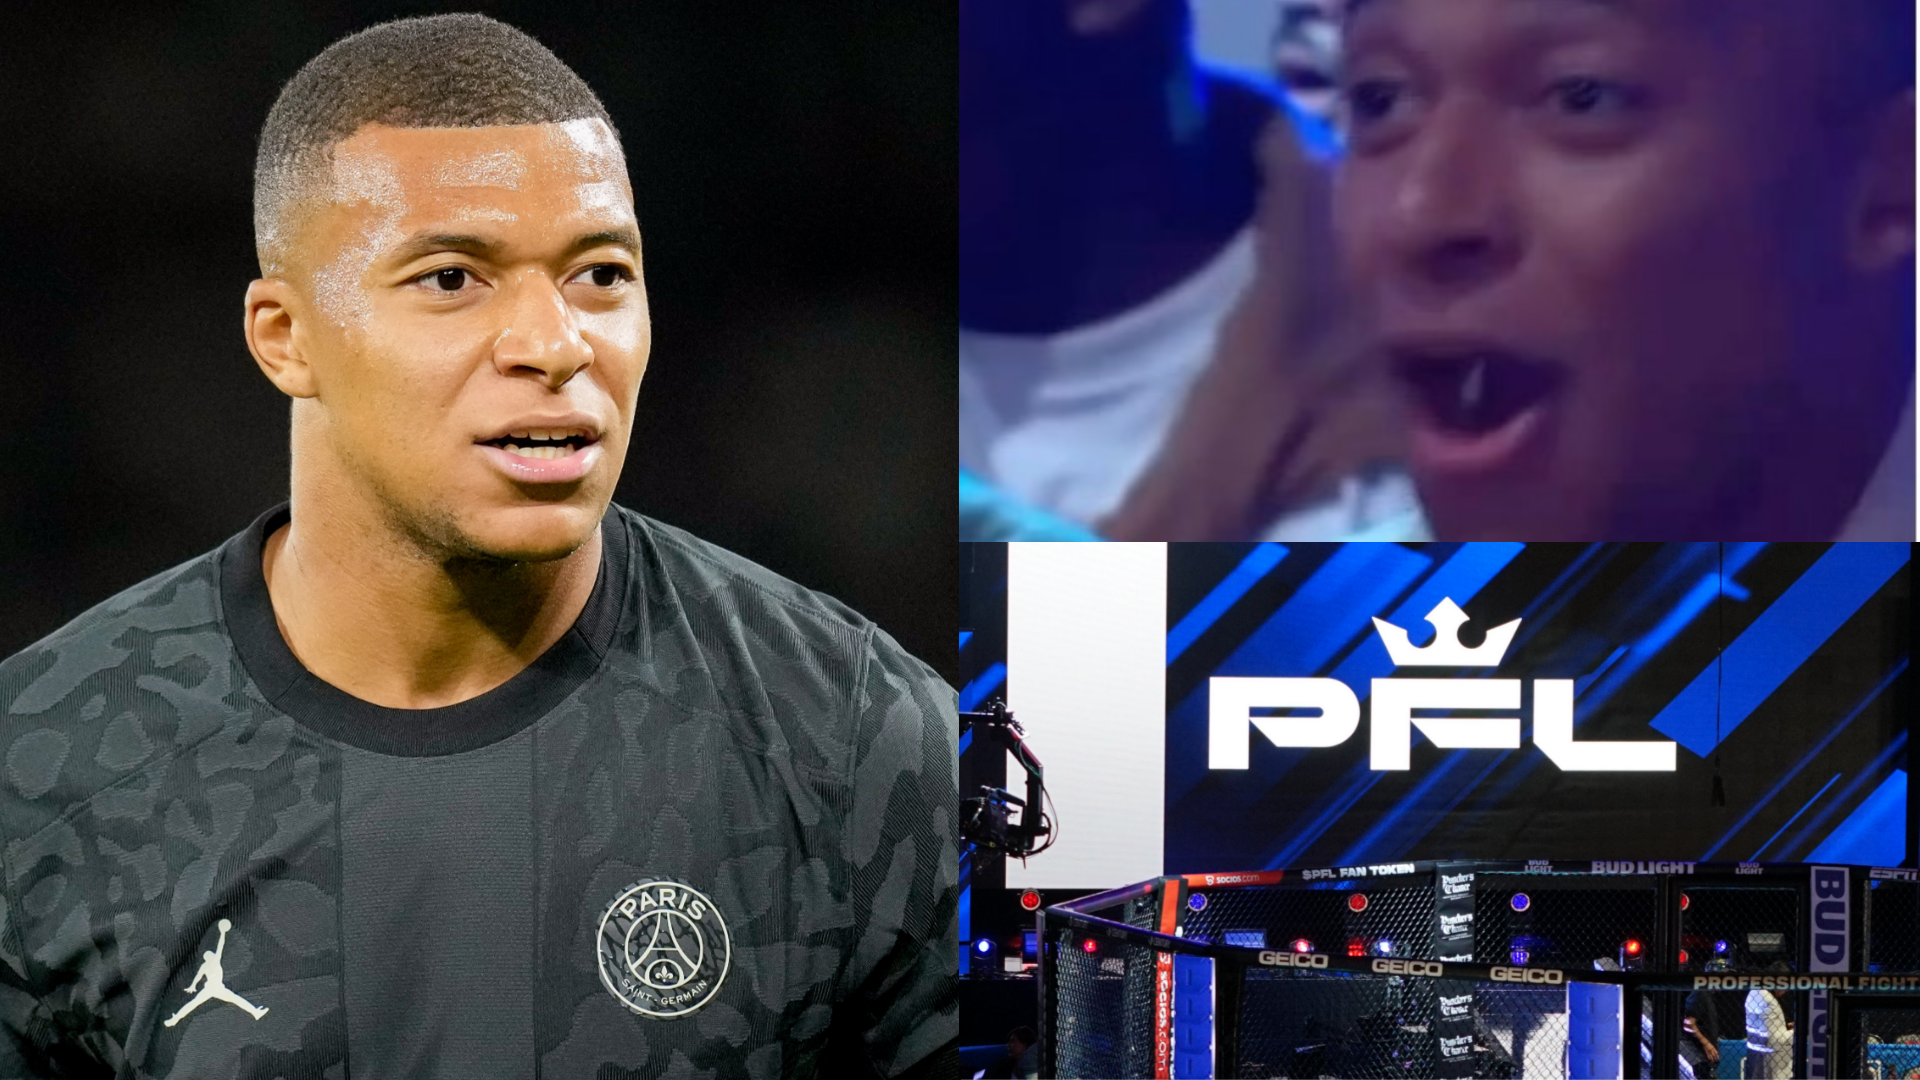 WATCH: Stunning knockout punch leaves Kylian Mbappe gobsmacked as PSG superstar attends PFL Europe event with Ousmane Dembele and Achraf Hakimi